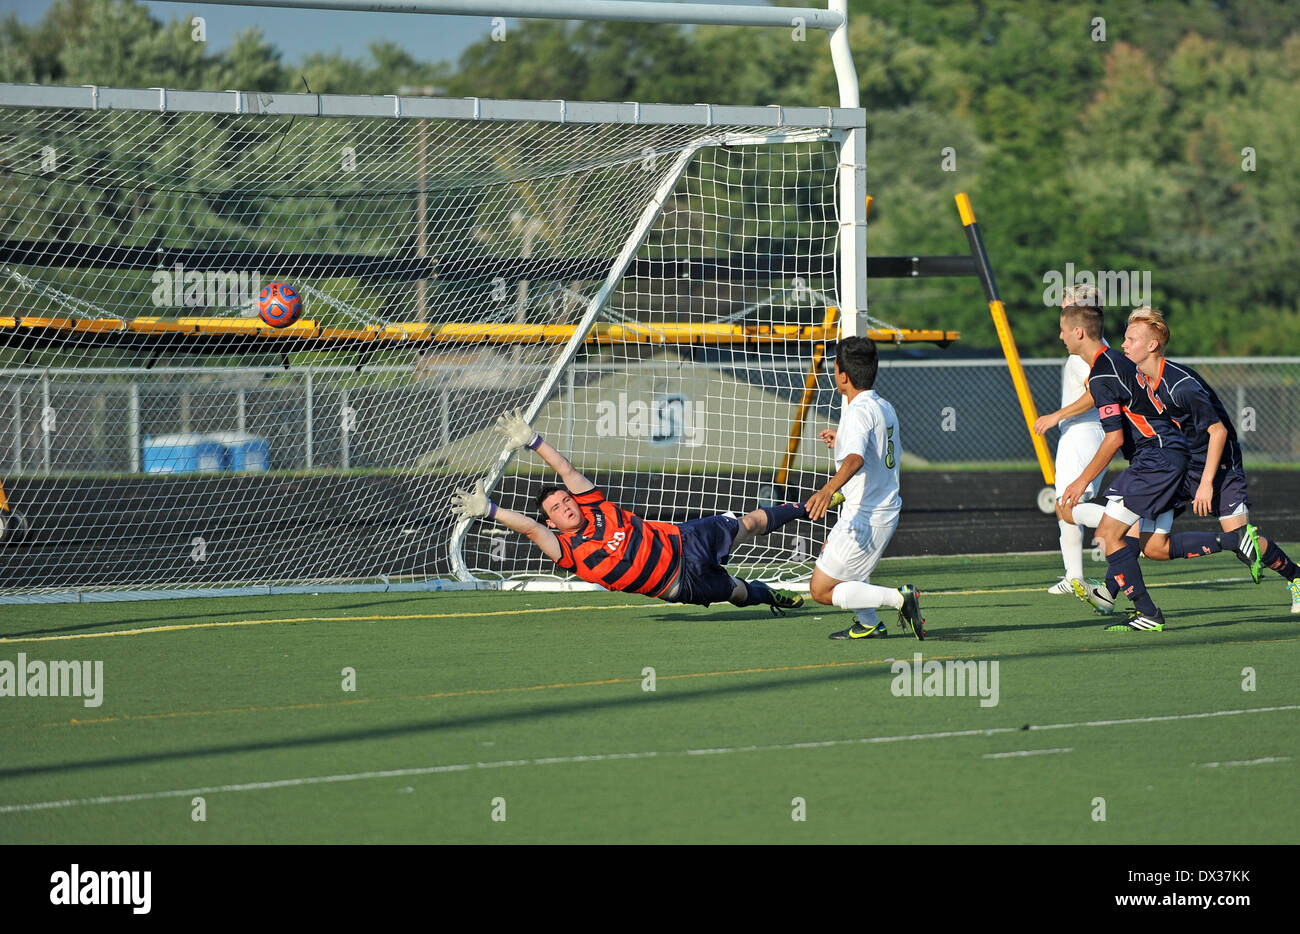 Soccer/football  player slams a rebound past a diving goal keeper for a score during a high school match. USA. Stock Photo